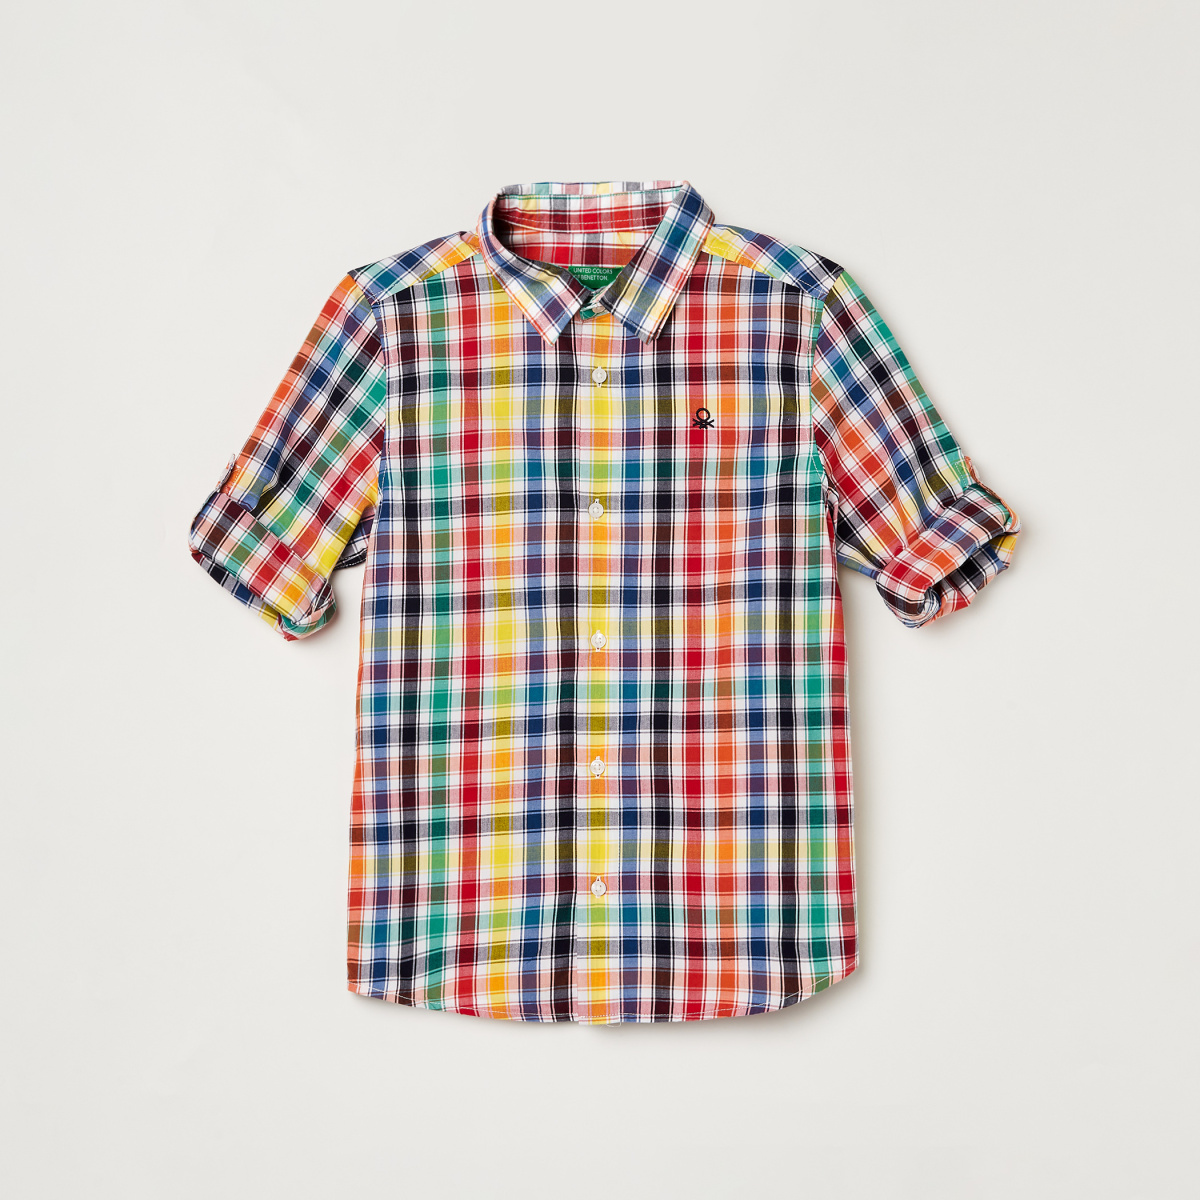 UNITED COLORS OF BENETTON Boys Checked Regular Fit Casual Shirt